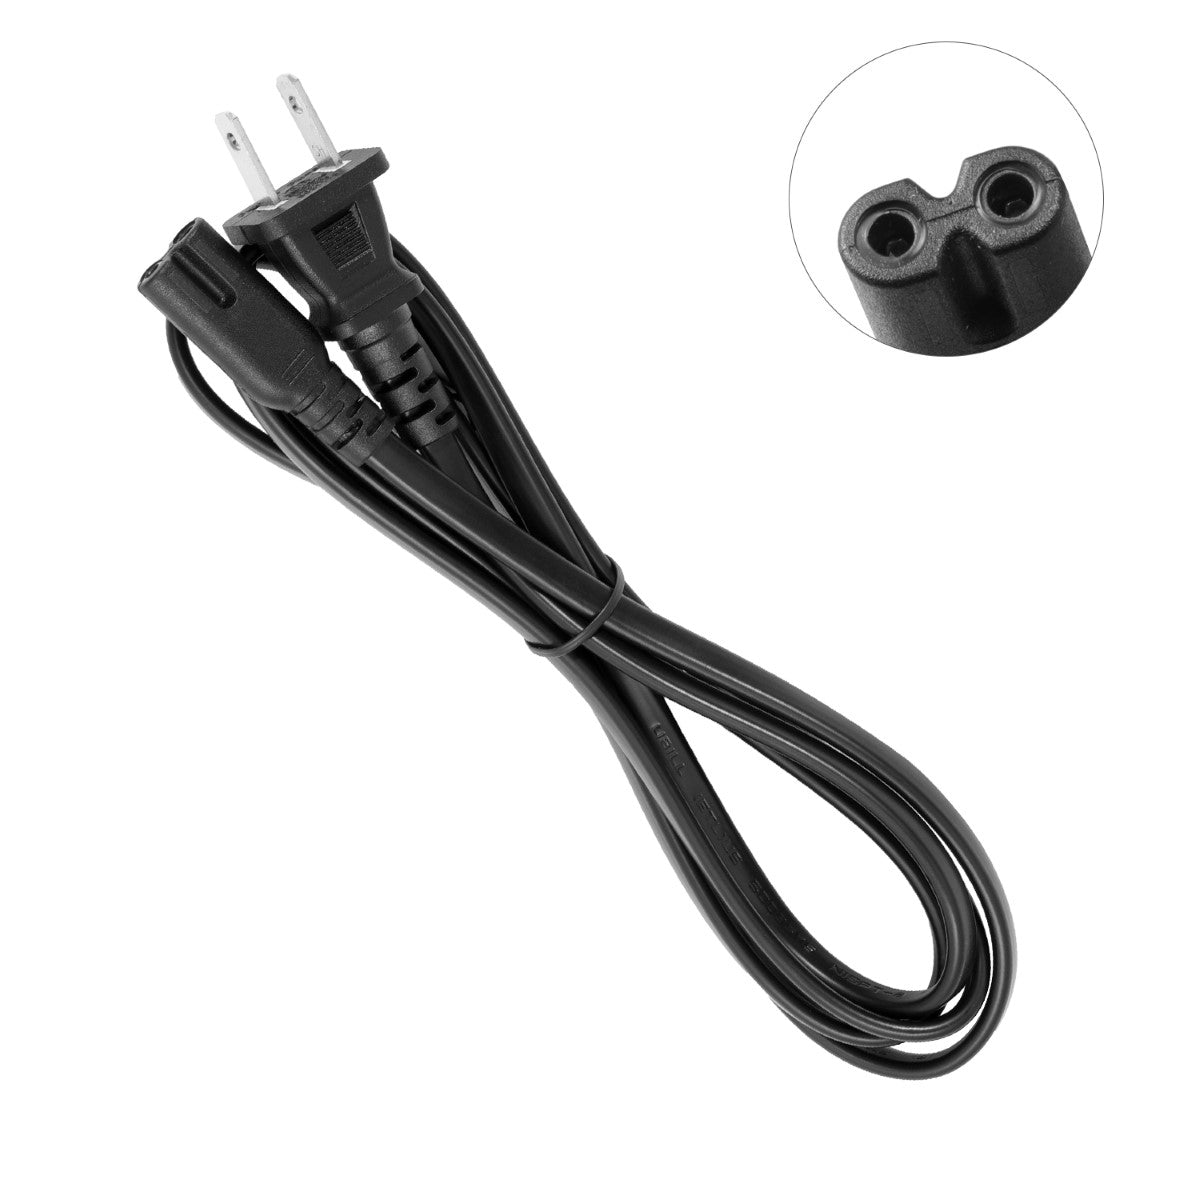 Power Cord for HP Officejet Pro X451dw Printer.